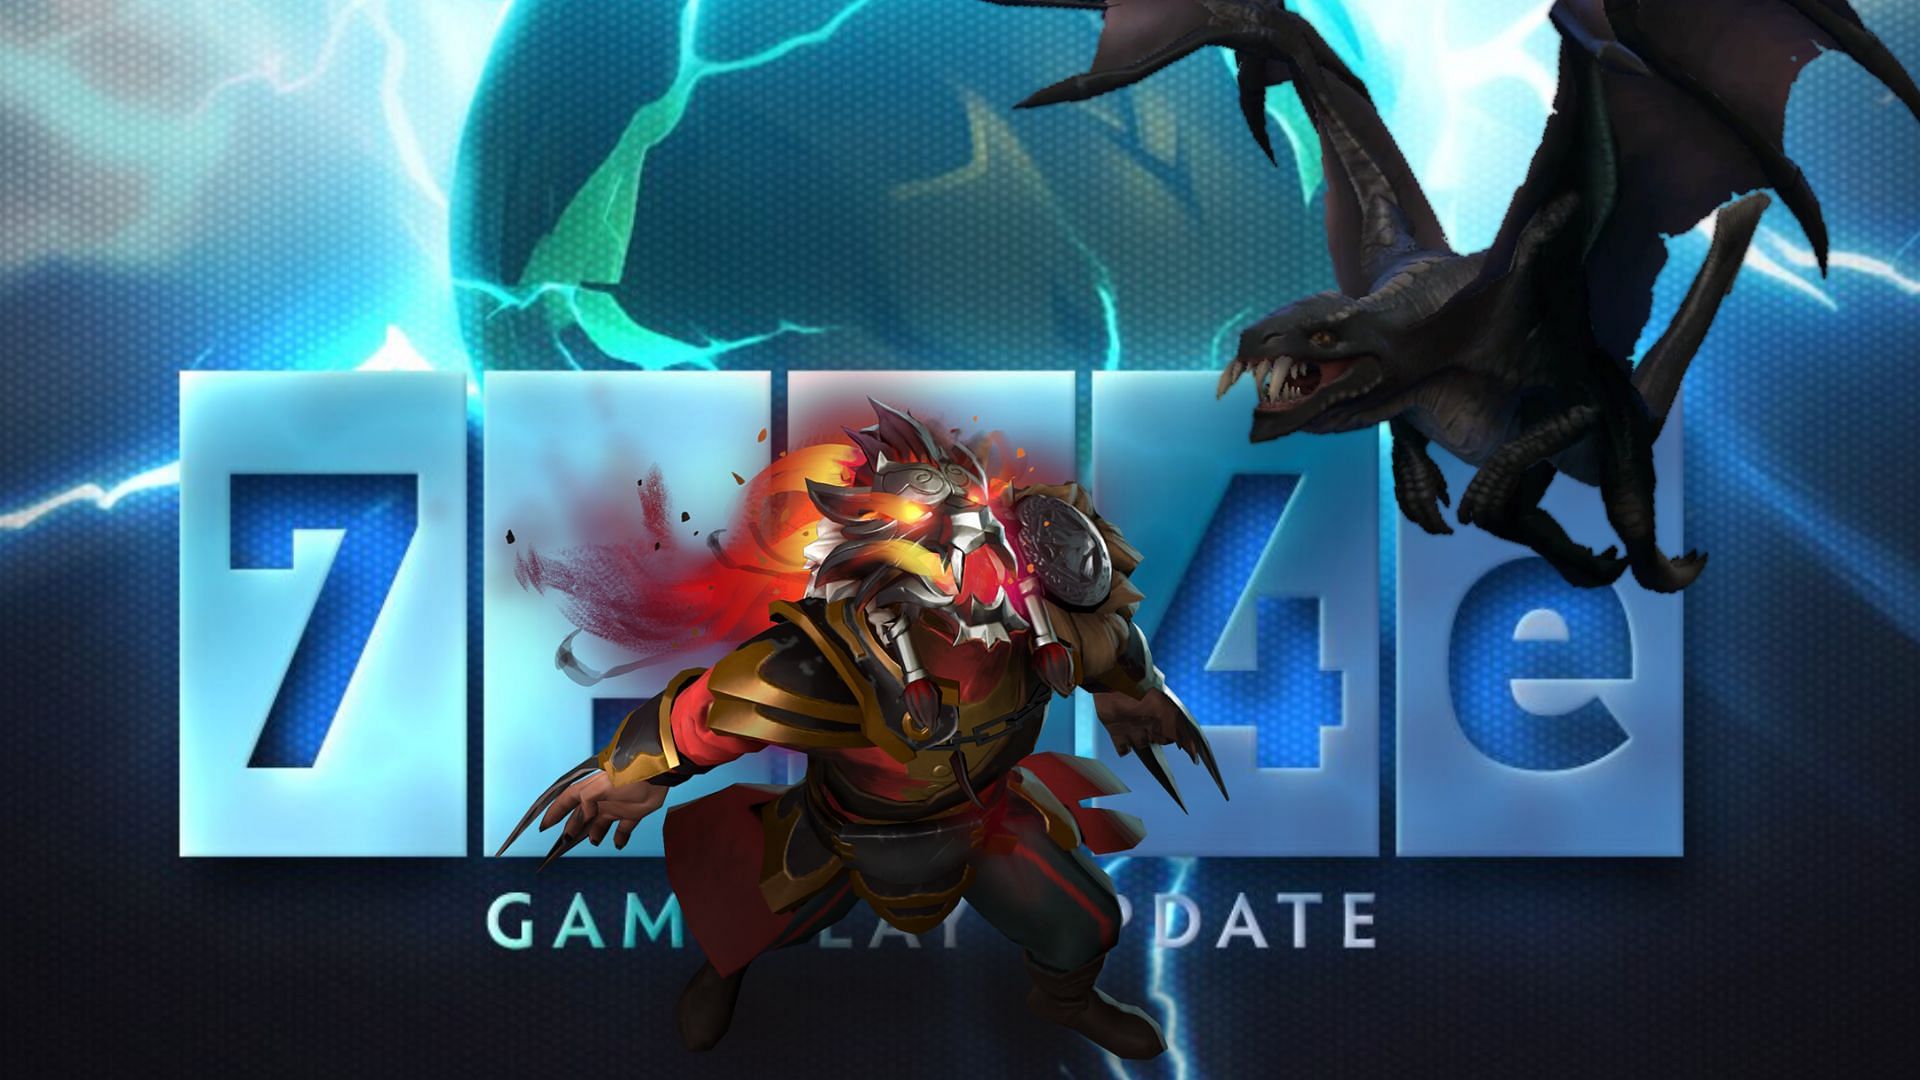 Featured image of the 7.34e patch with Lycan and Ancient Blackdragon (Image via Dota 2 and Sportskeeda)